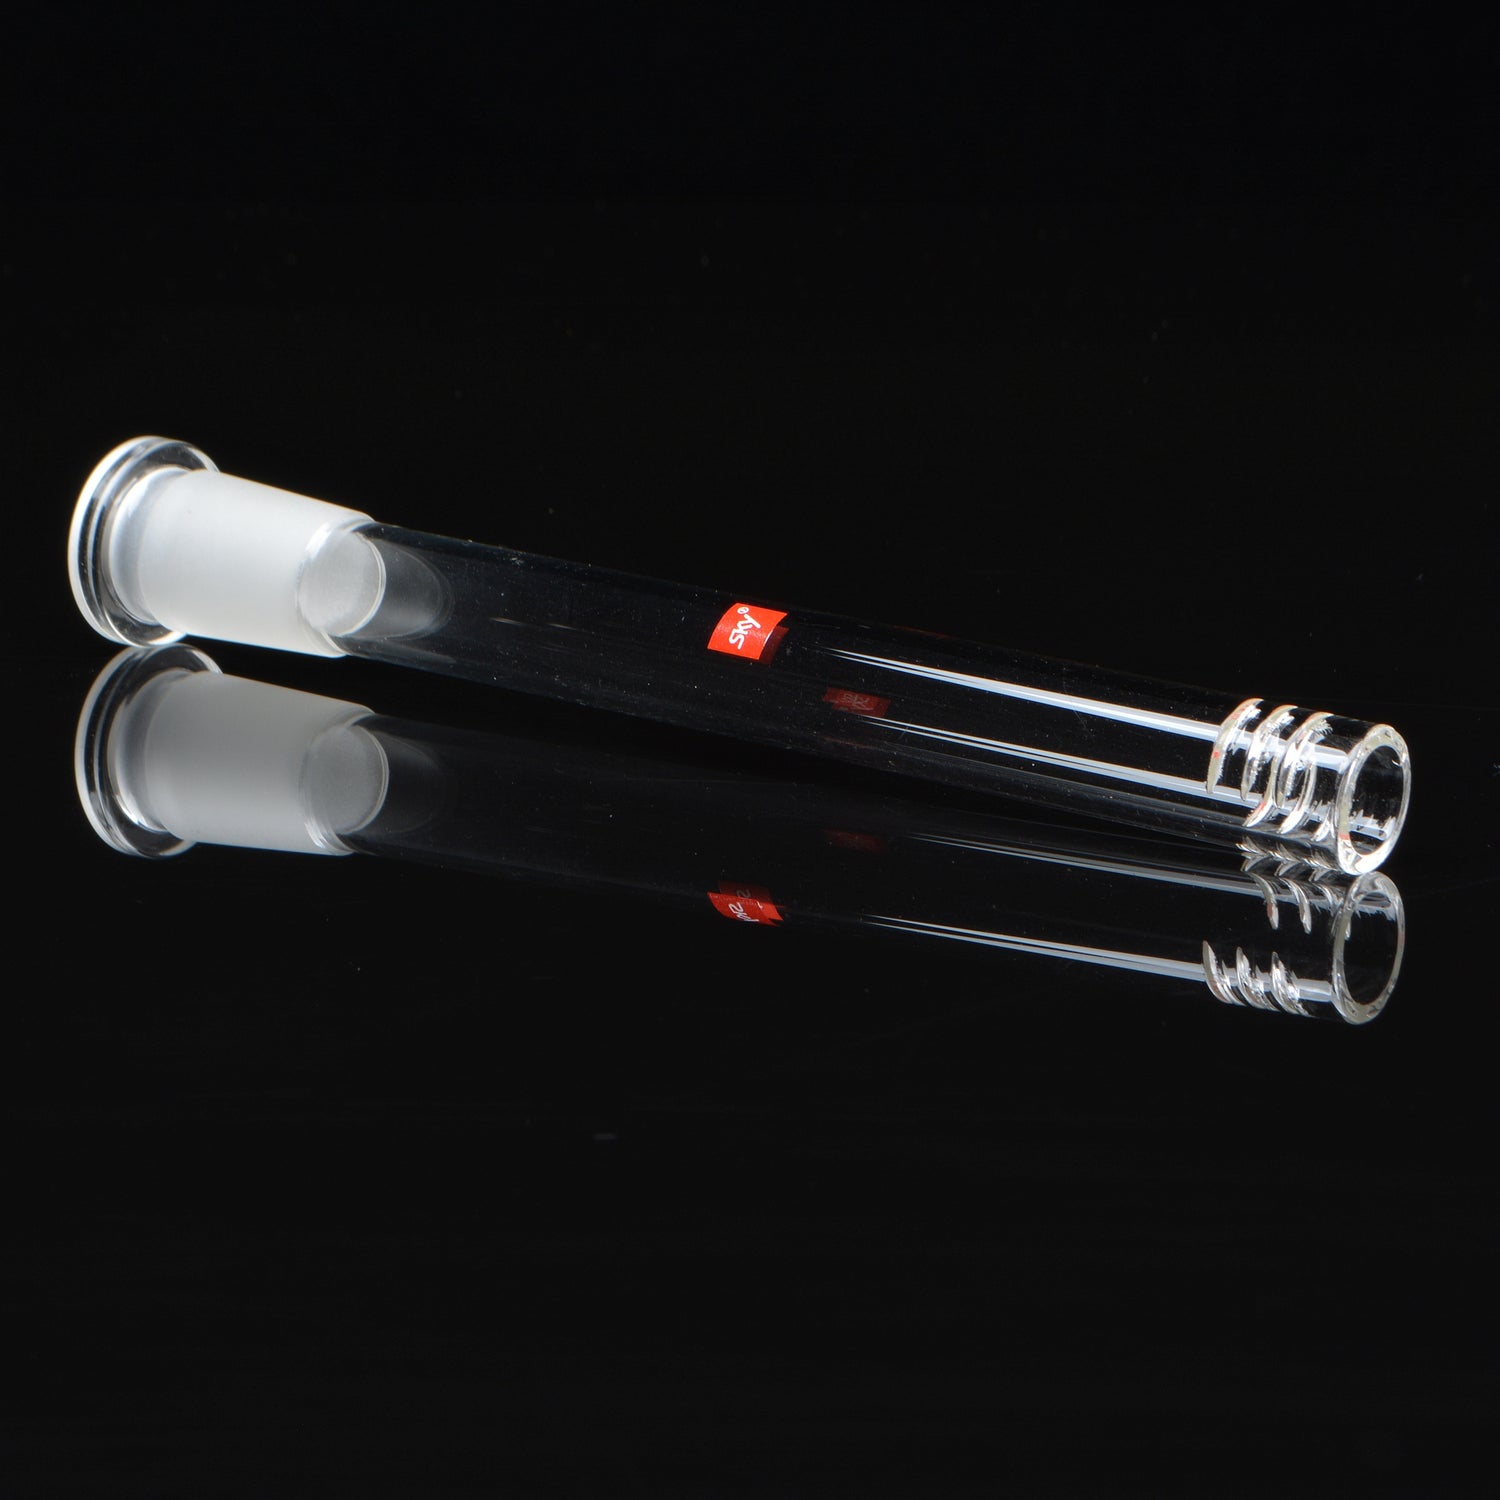 Reflective shot of the 6-slitt style downstem, rotated 45 degrees